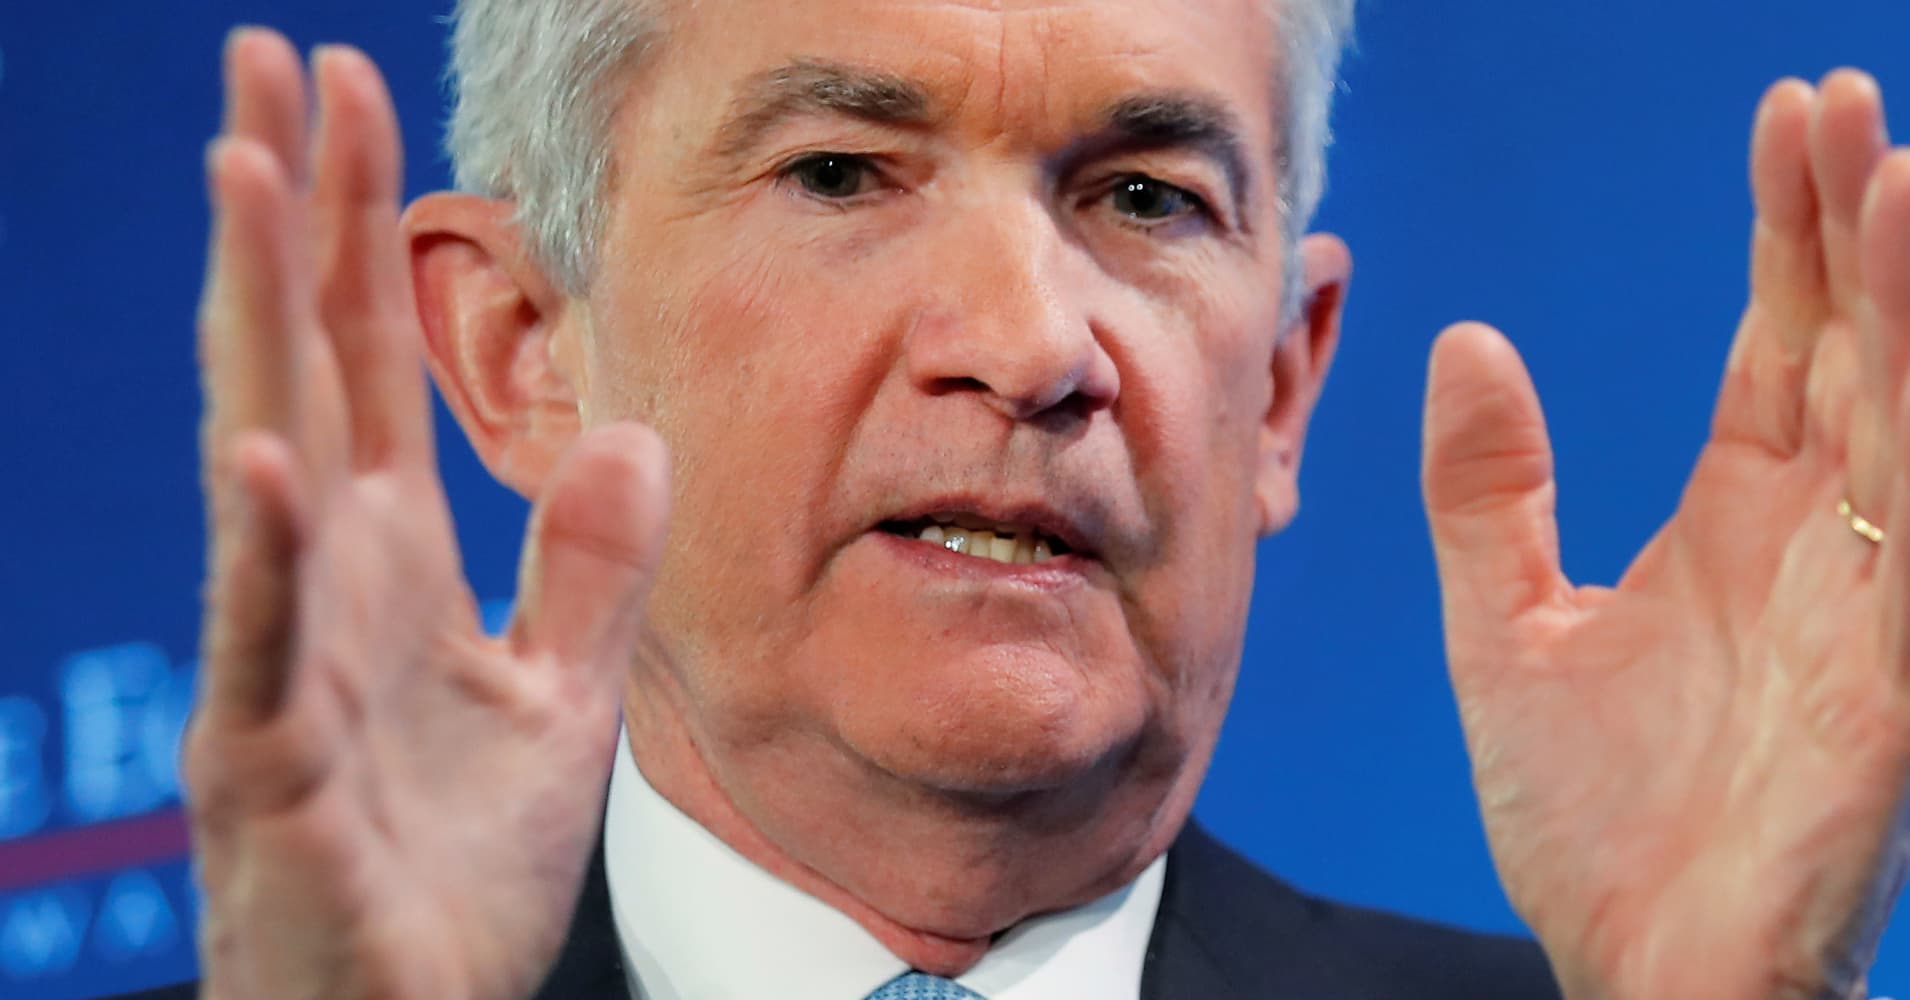 Powell says Fed's balance sheet will be 'substantially smaller,' indicating more tightening ahead